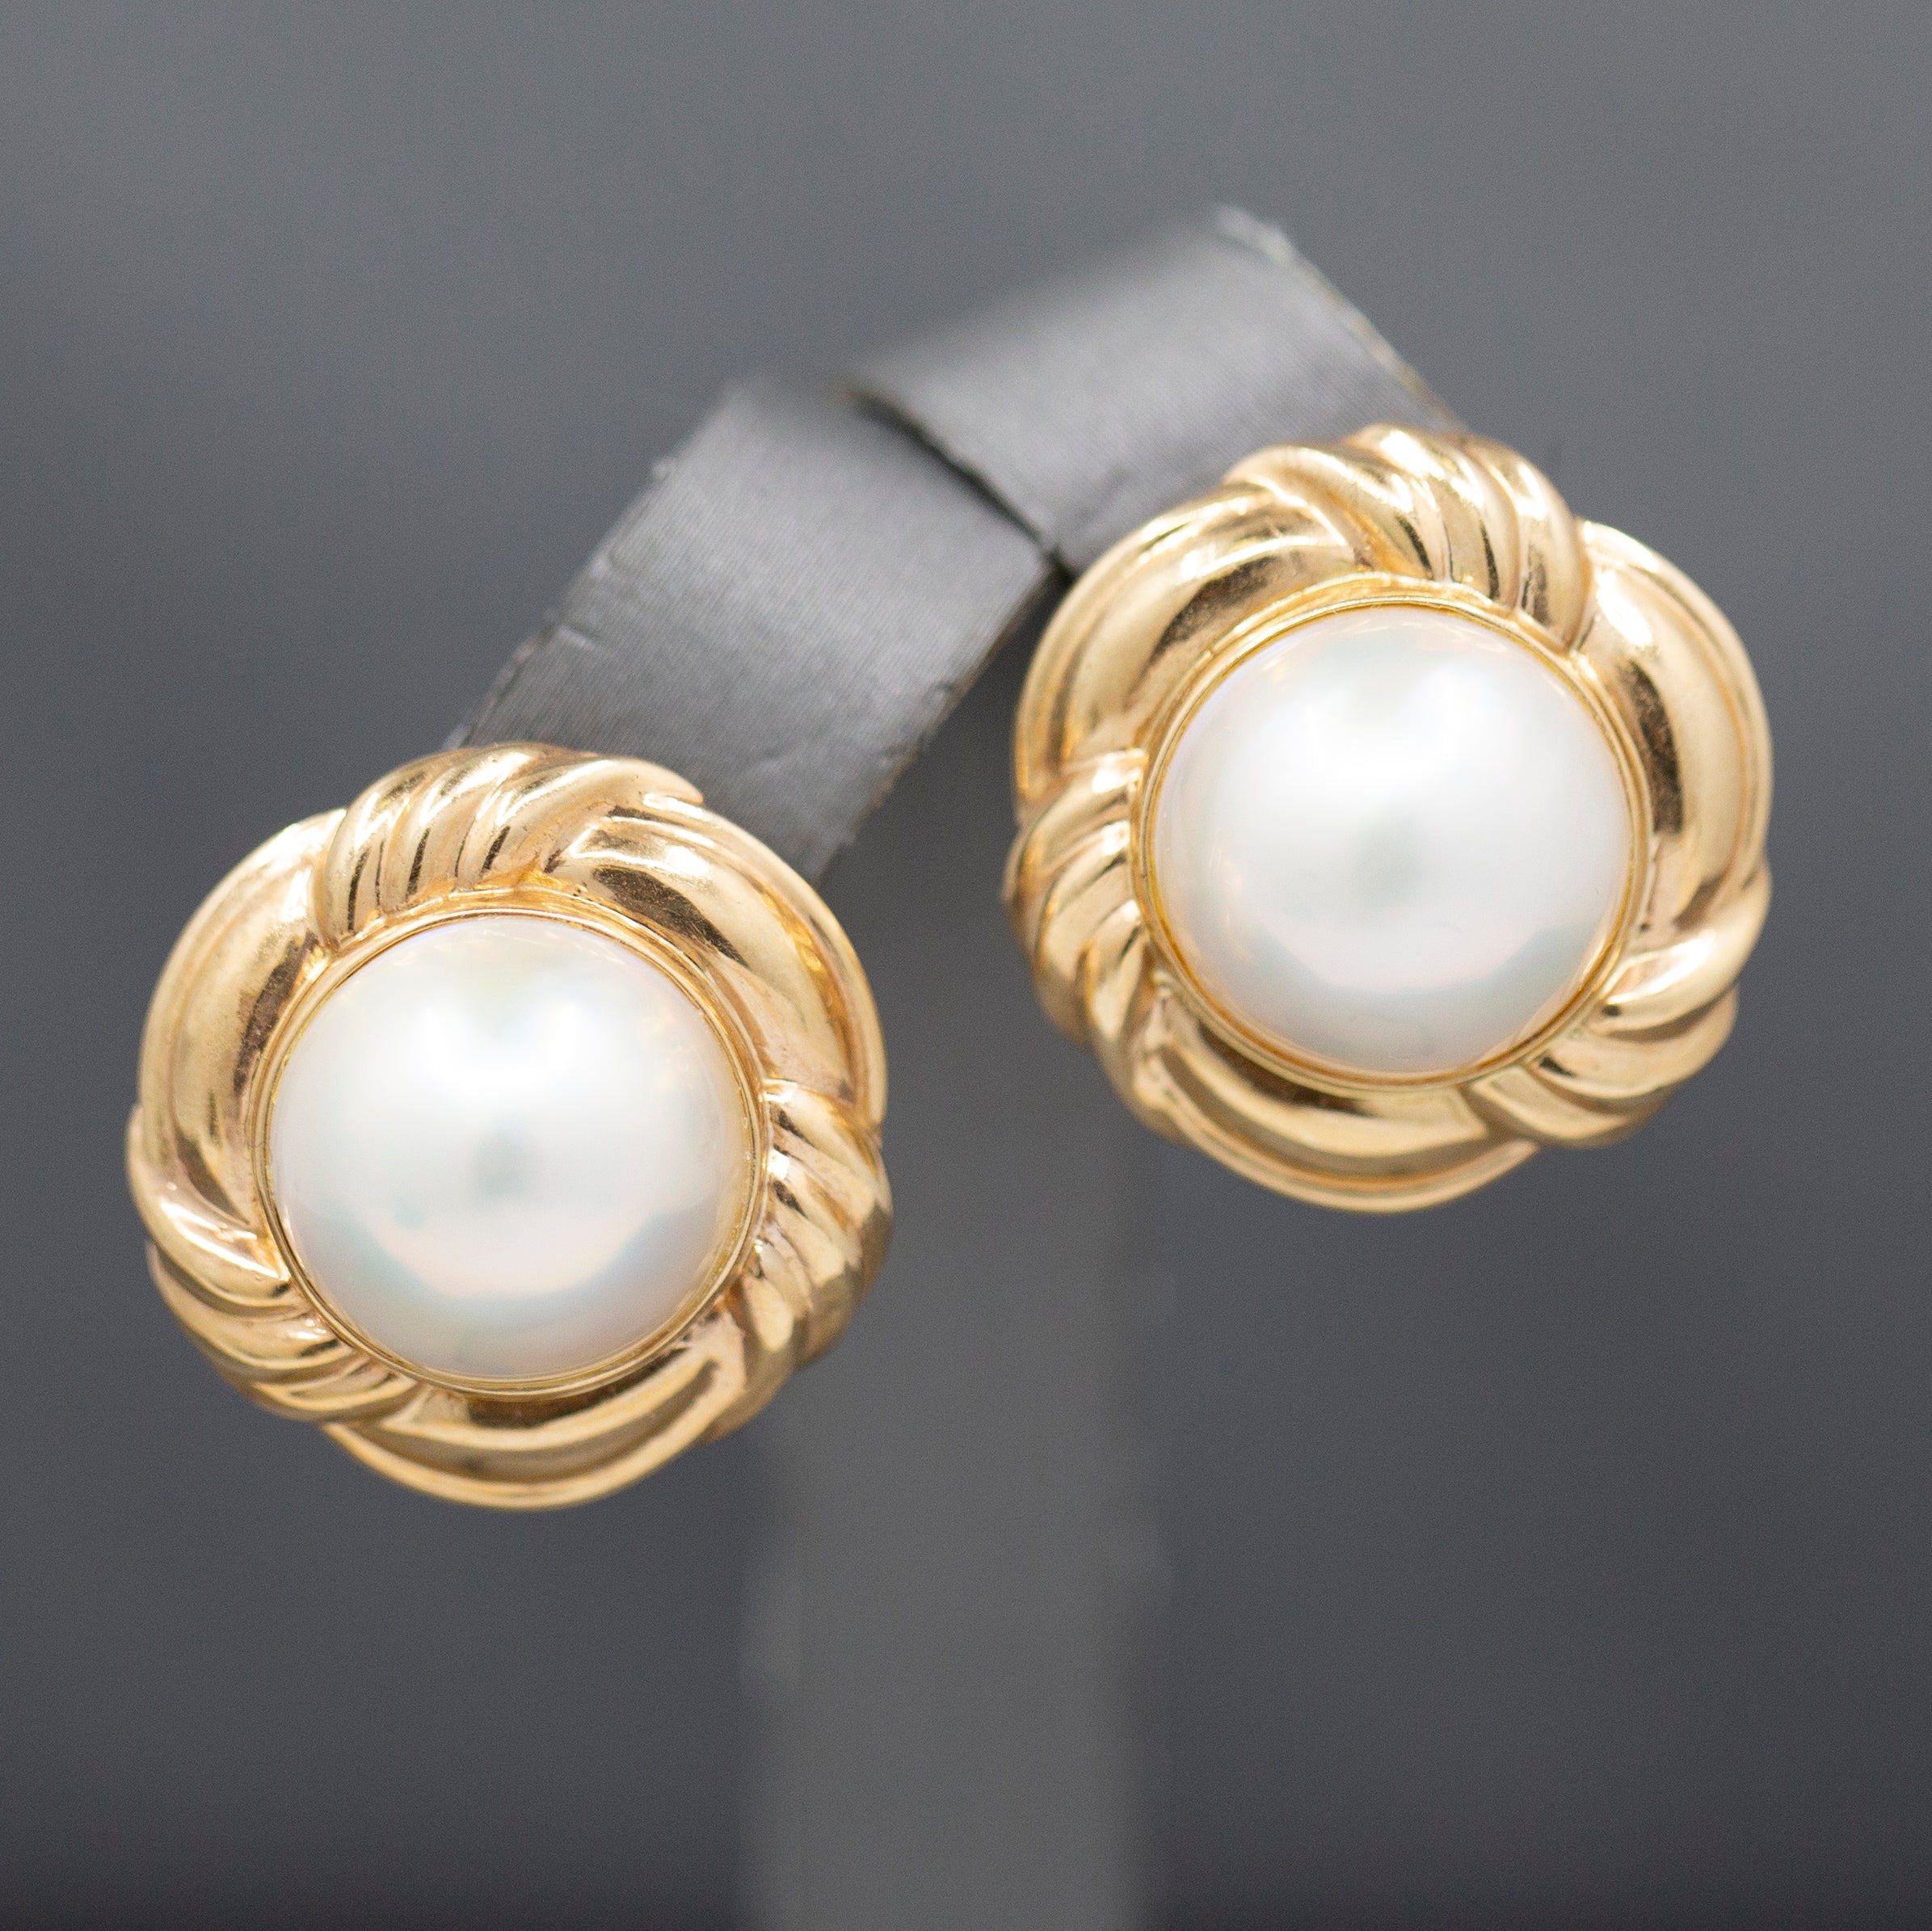 Vintage Lustrous Mabe Pearl Earrings in Scalloped Frames with Omega Back in 14k Yellow Gold